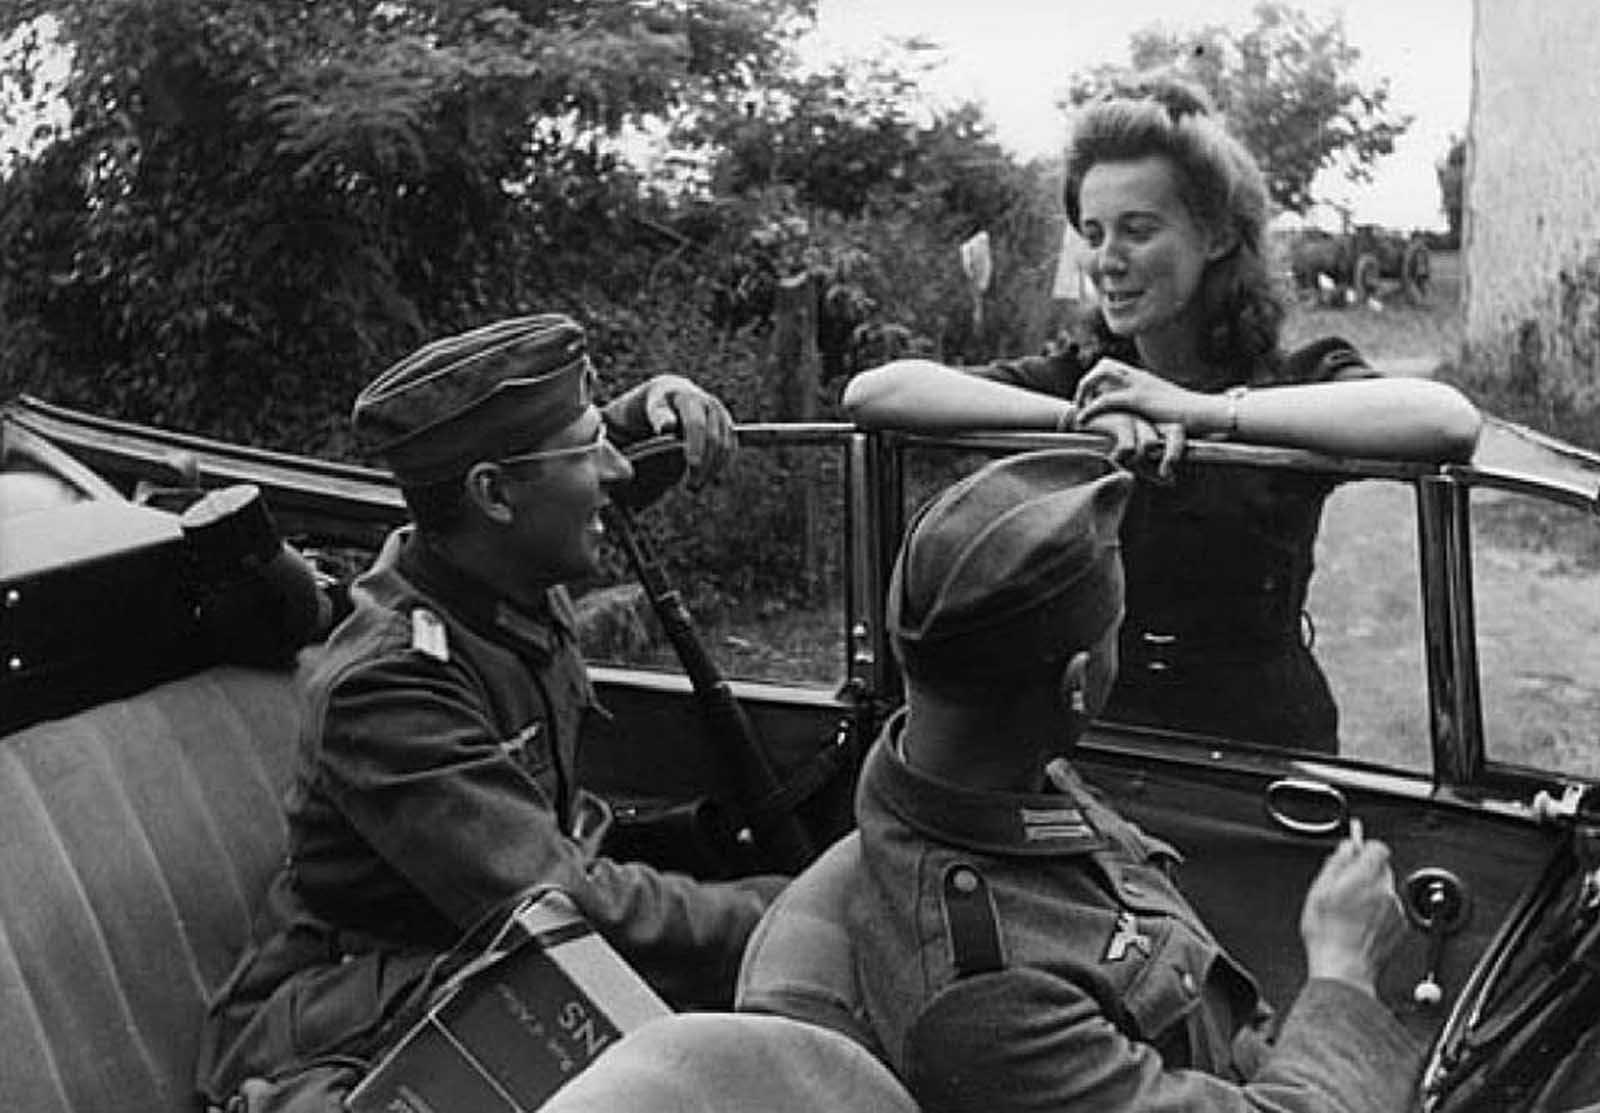 German soldiers and a French girl engage in a conversations 